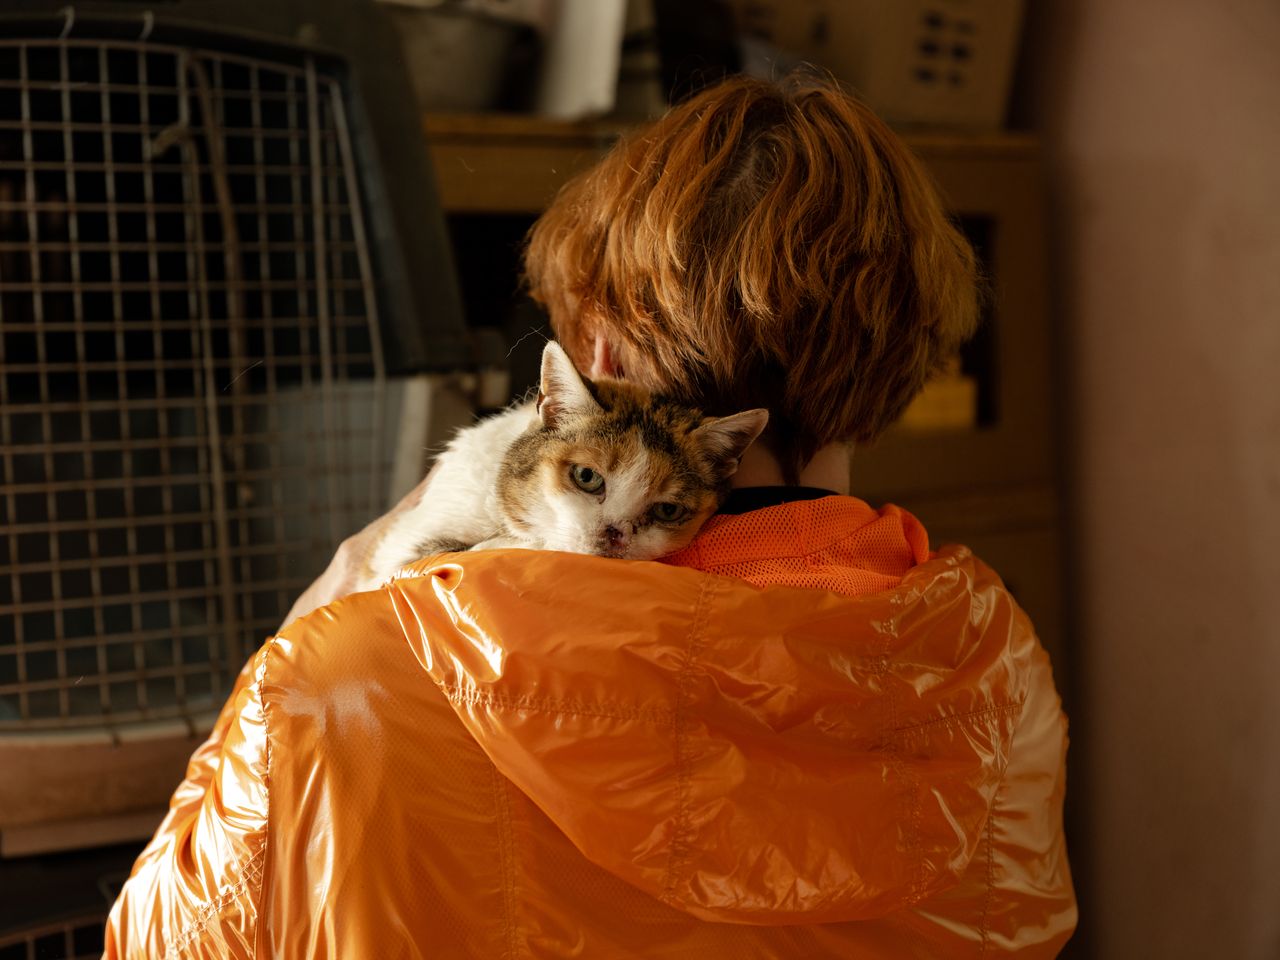 Maryna Shumeiko, 46, holds an injured cat that was rescued after the Russian occupation of Kyiv at her shelter, CatDog, in Ivankiv, Ukraine.